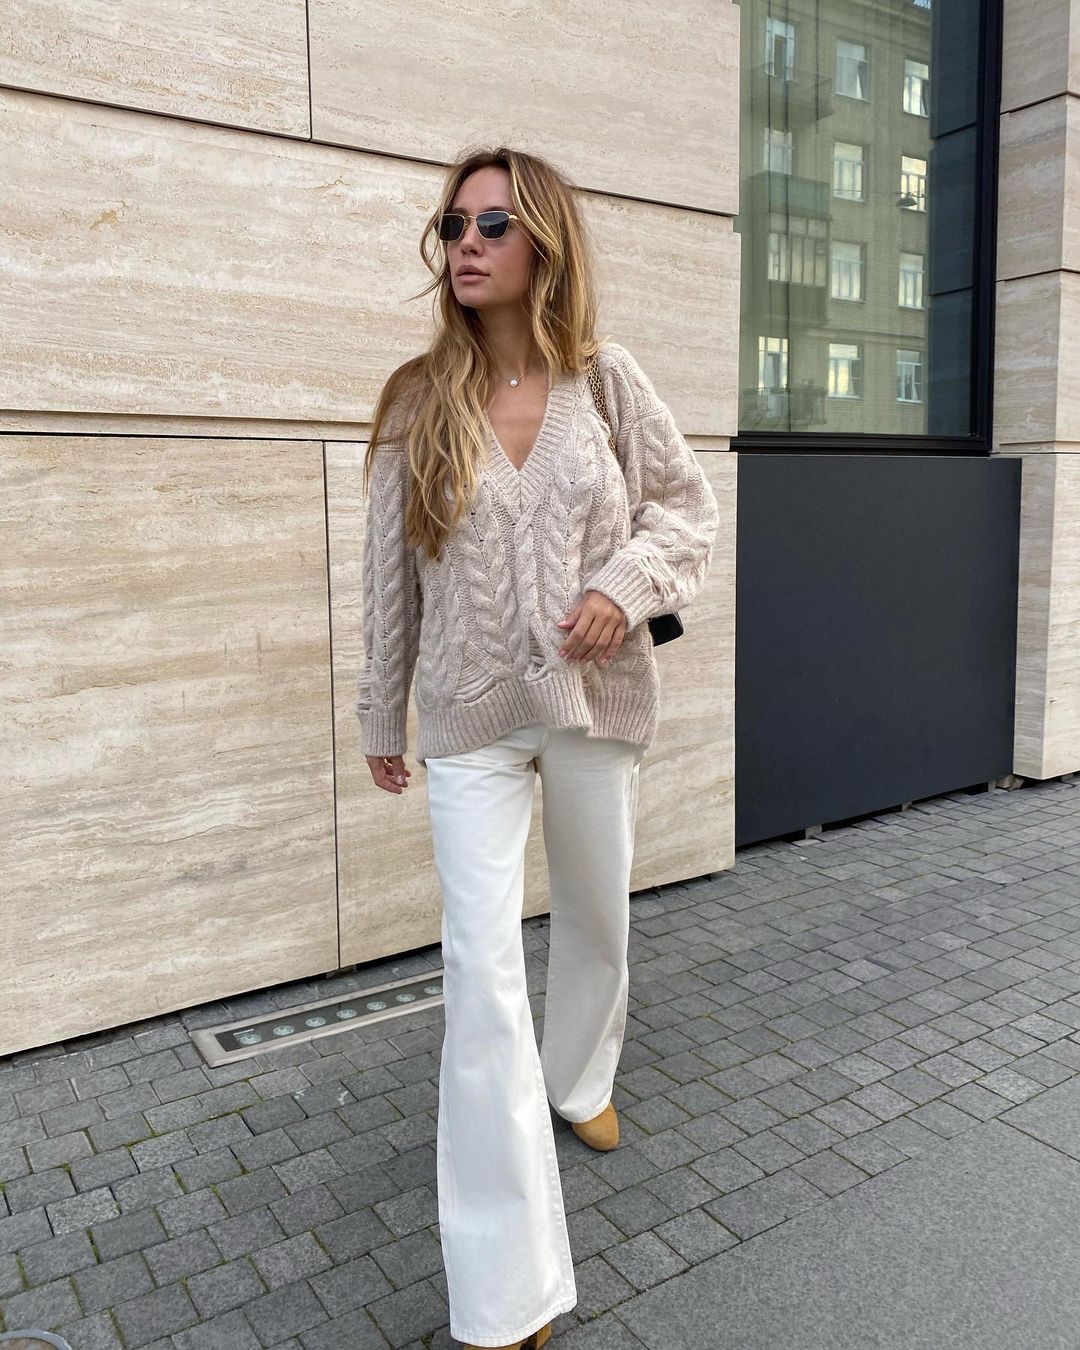 A Neutral Sweater is a Fall/Winter Must-Buy